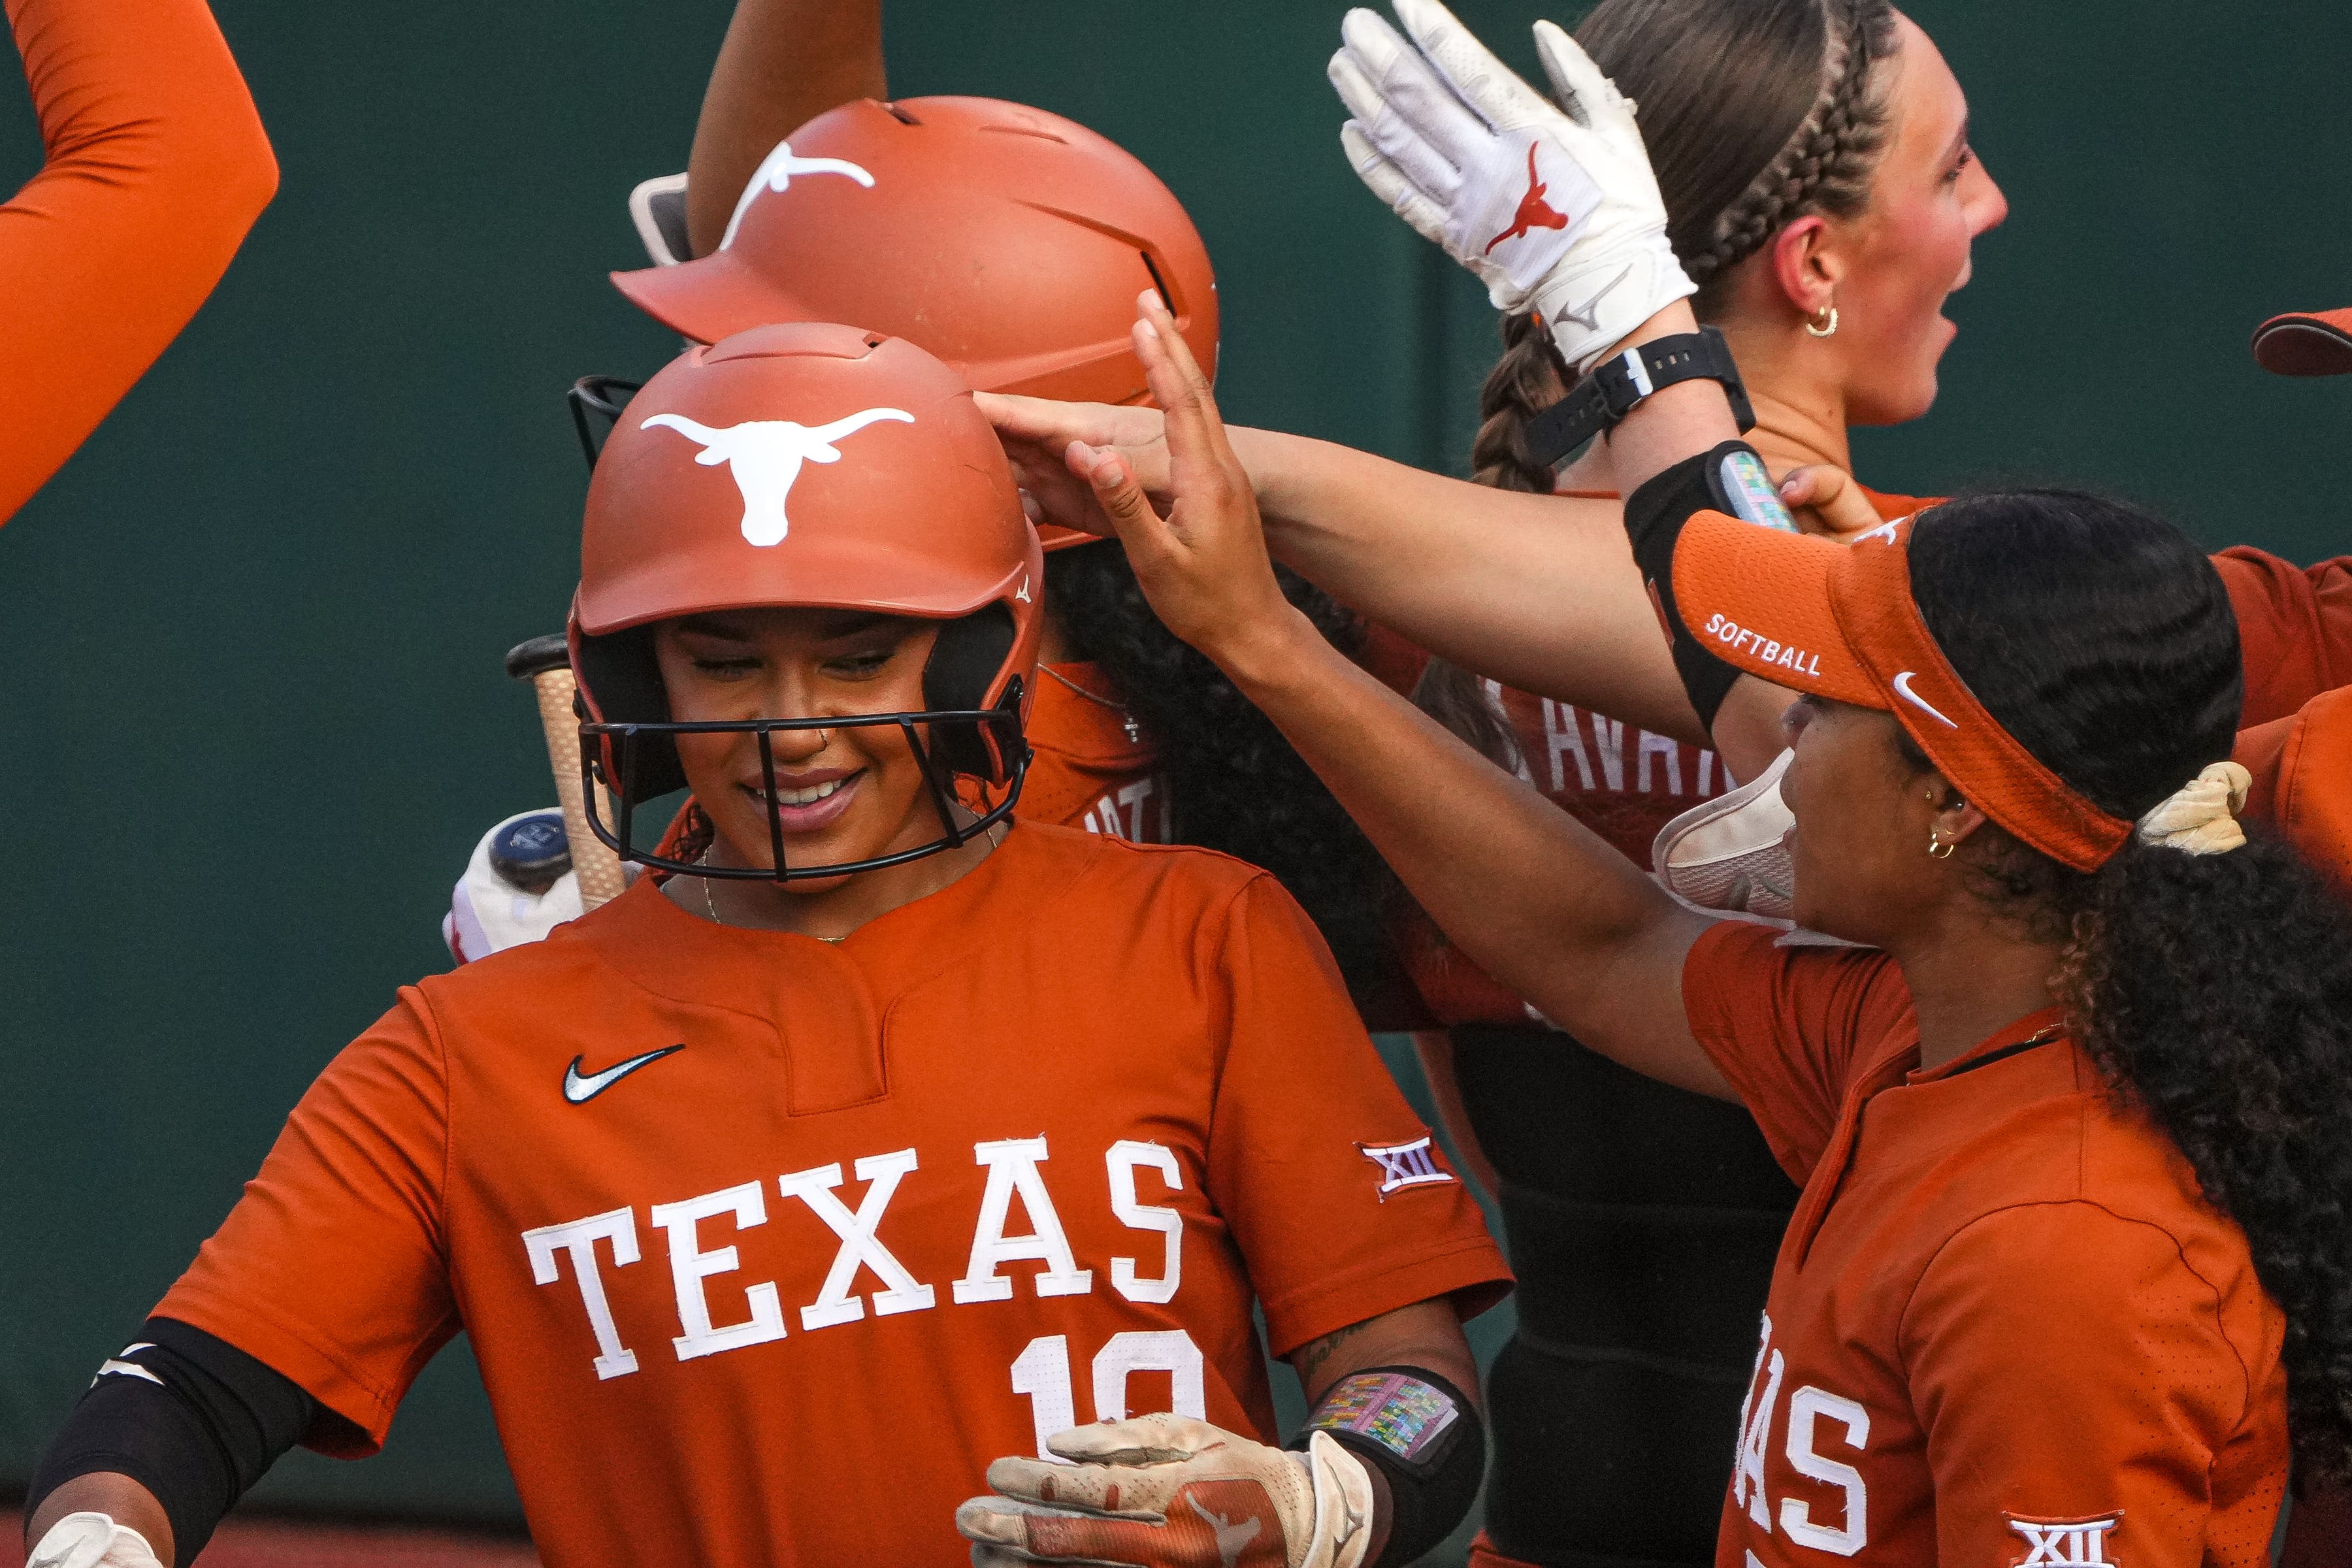 Will the Big 12 Tournament champ be the No. 1 overall NCAA seed? Texas says likely yes.